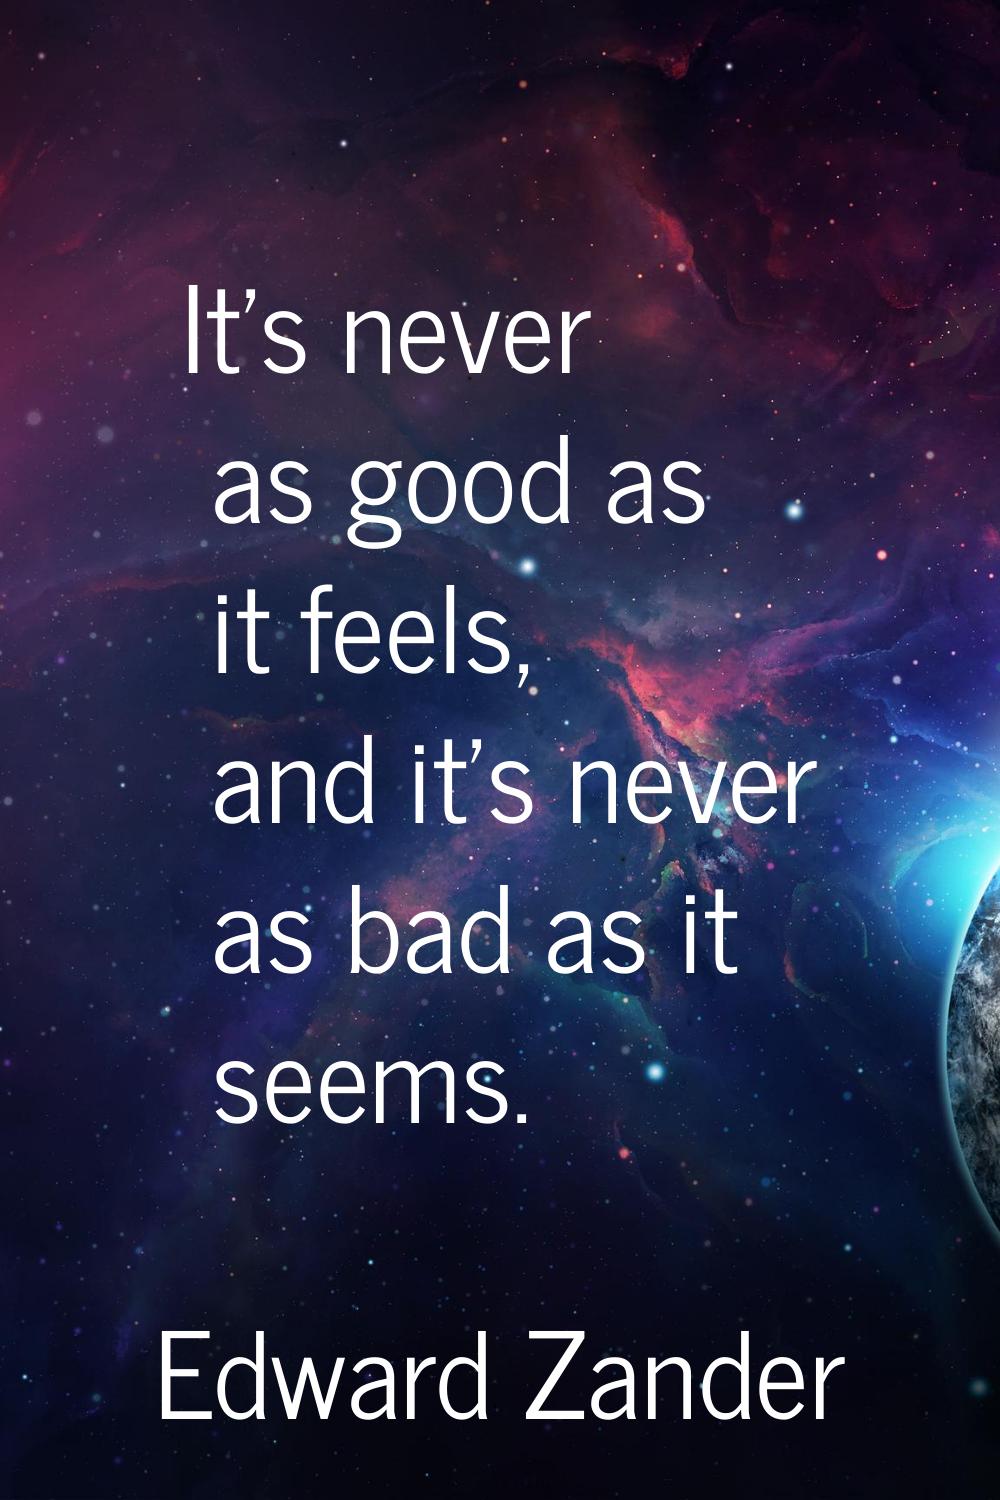 It's never as good as it feels, and it's never as bad as it seems.